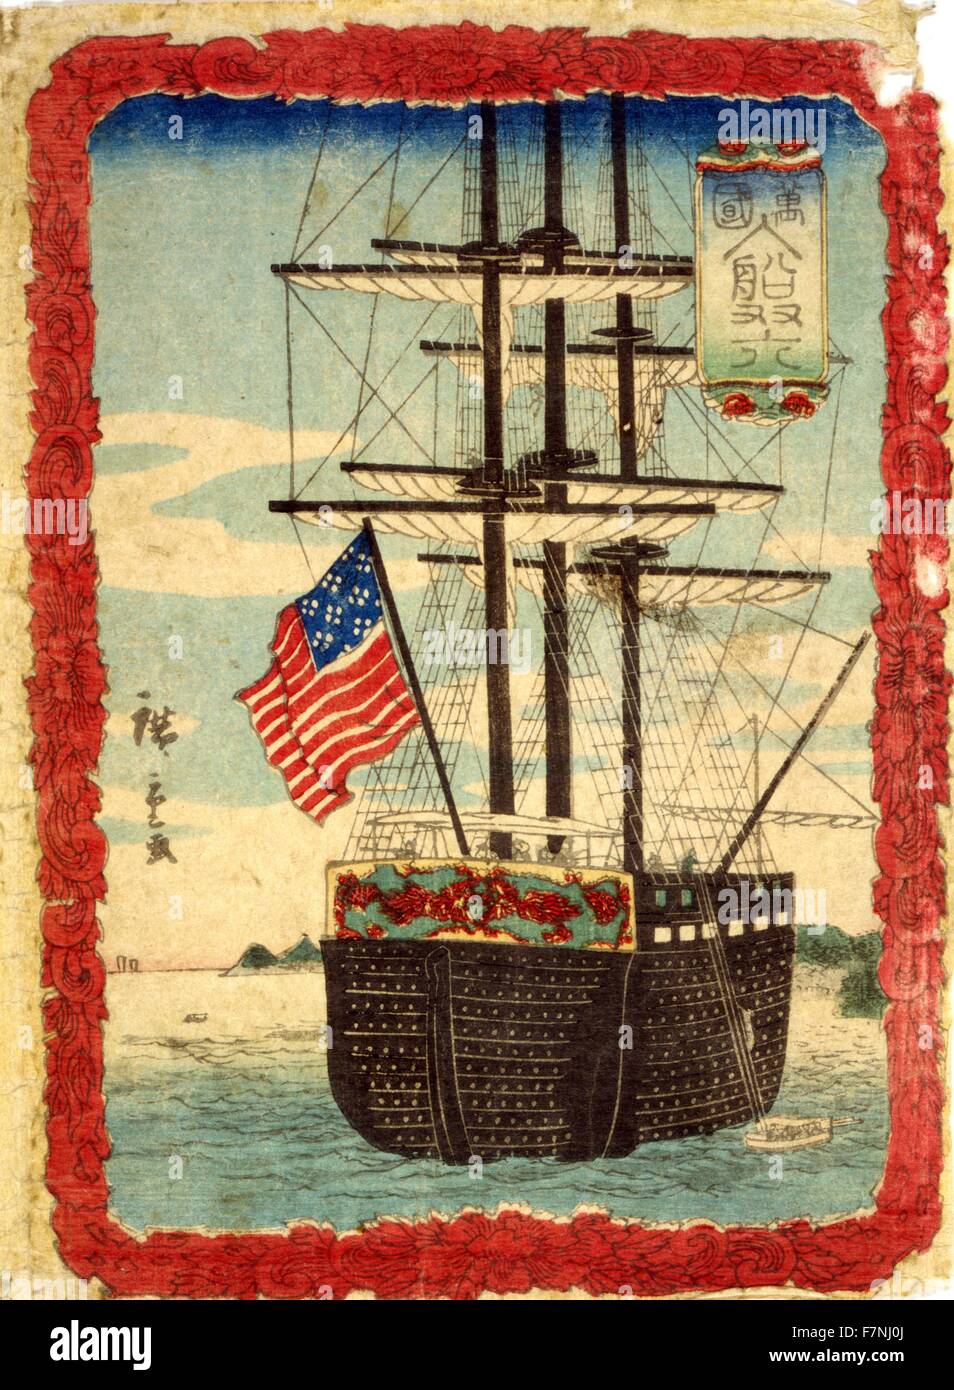 Foreign ships calling at port 1860 by Hiroshige Utagawa, 1826?-1869, Japanese artist. woodcut showing a sailing ship with an American flag in a harbor; illustrated sheet from Sugoroku game, which is similar to backgammon. Stock Photo